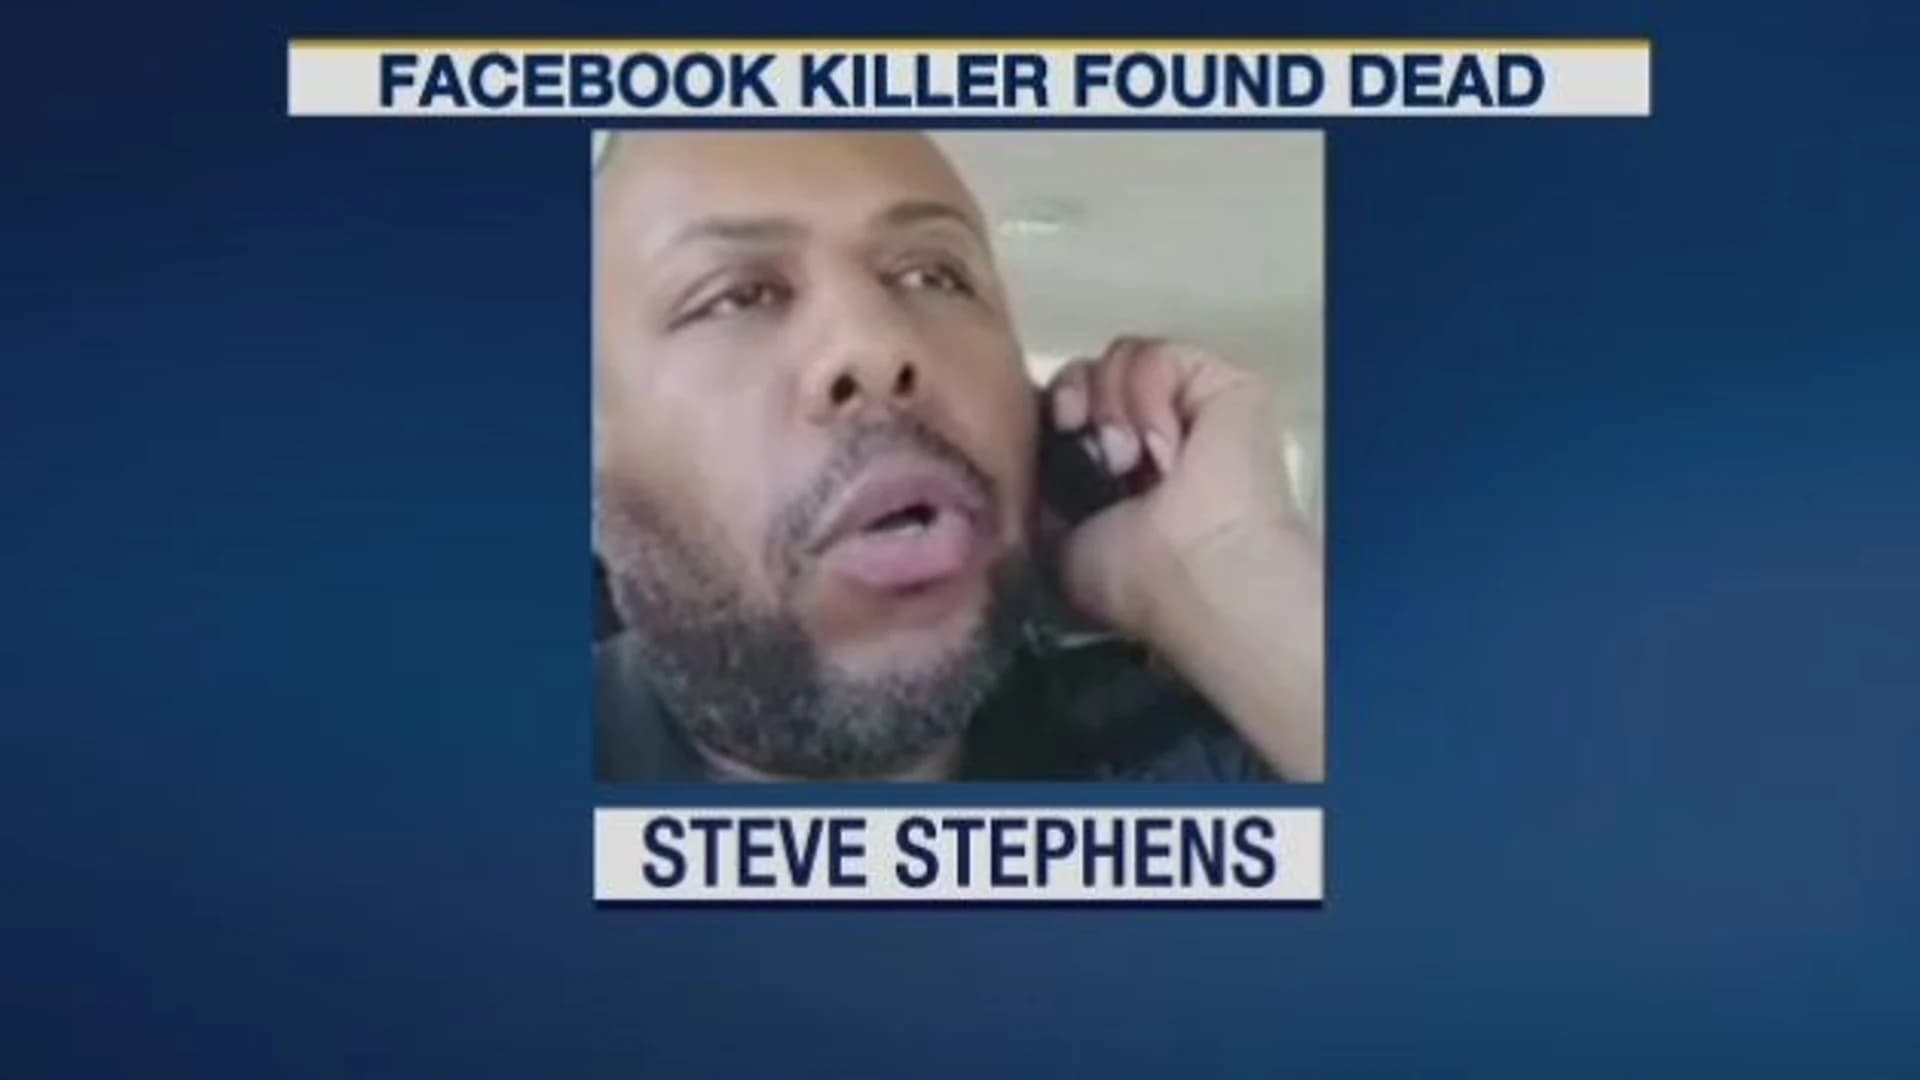 The Latest: Man sought in Cleveland Facebook killing is dead